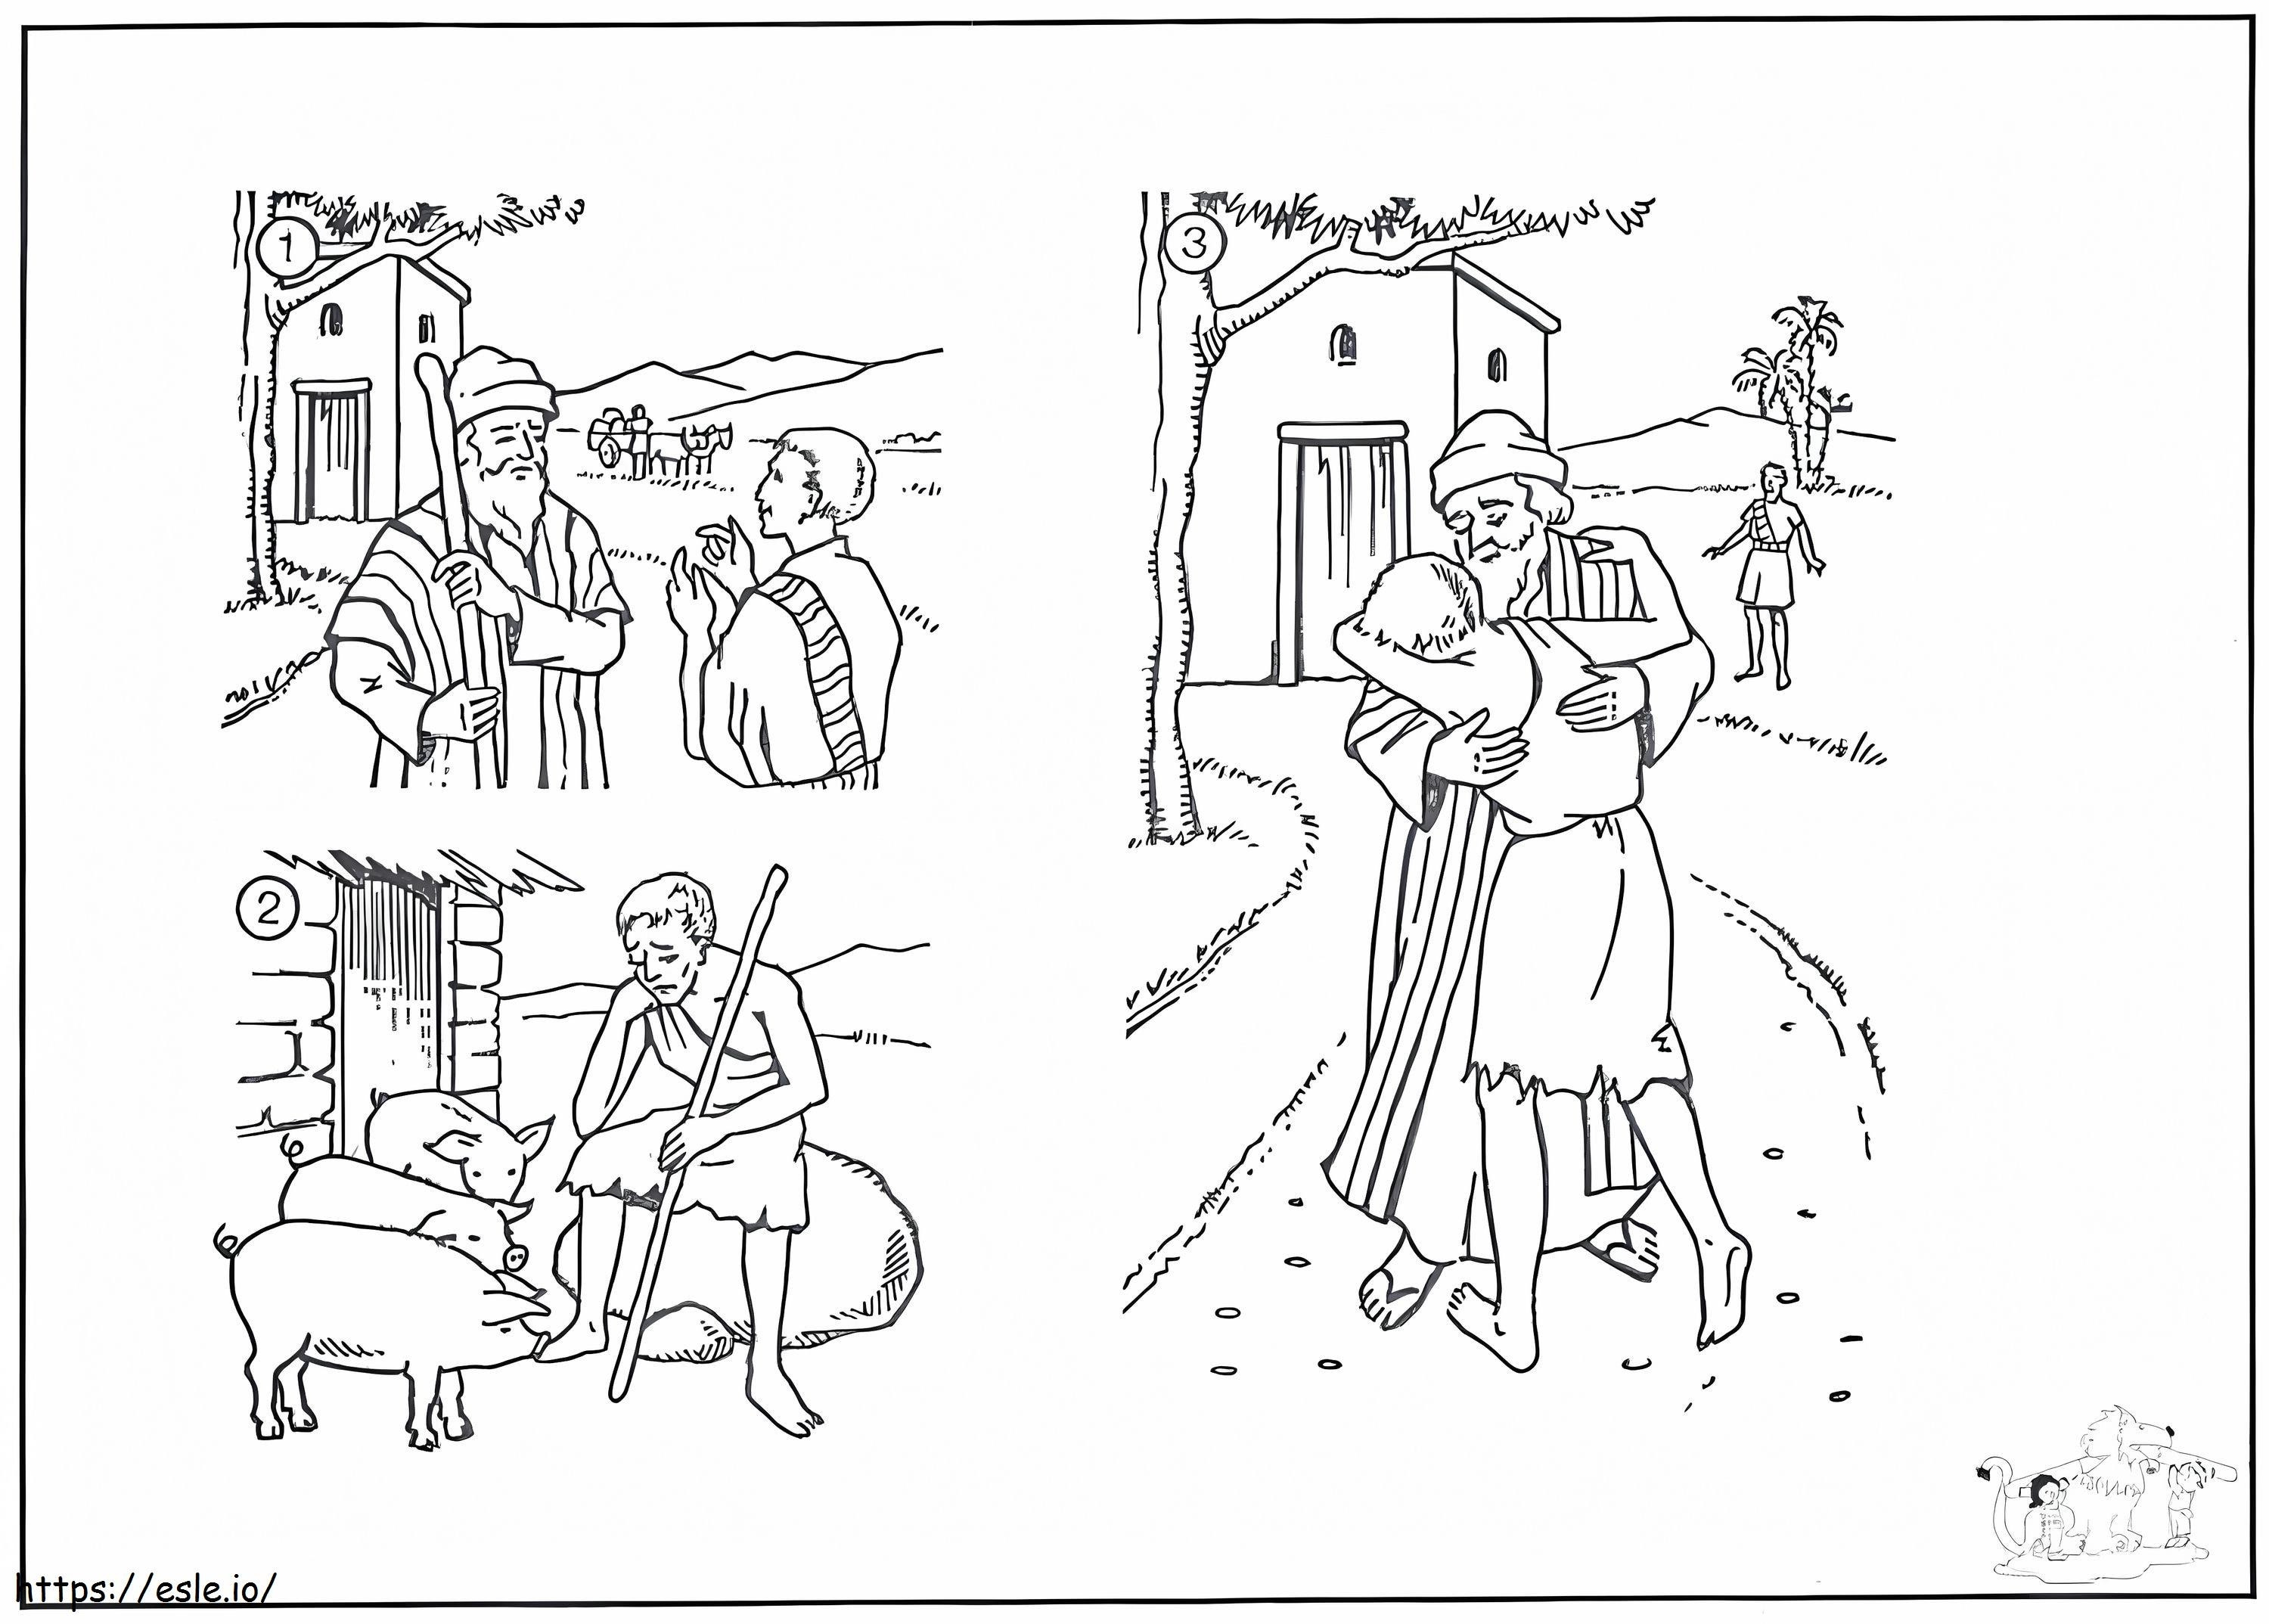 Prodigal Son 5 coloring page